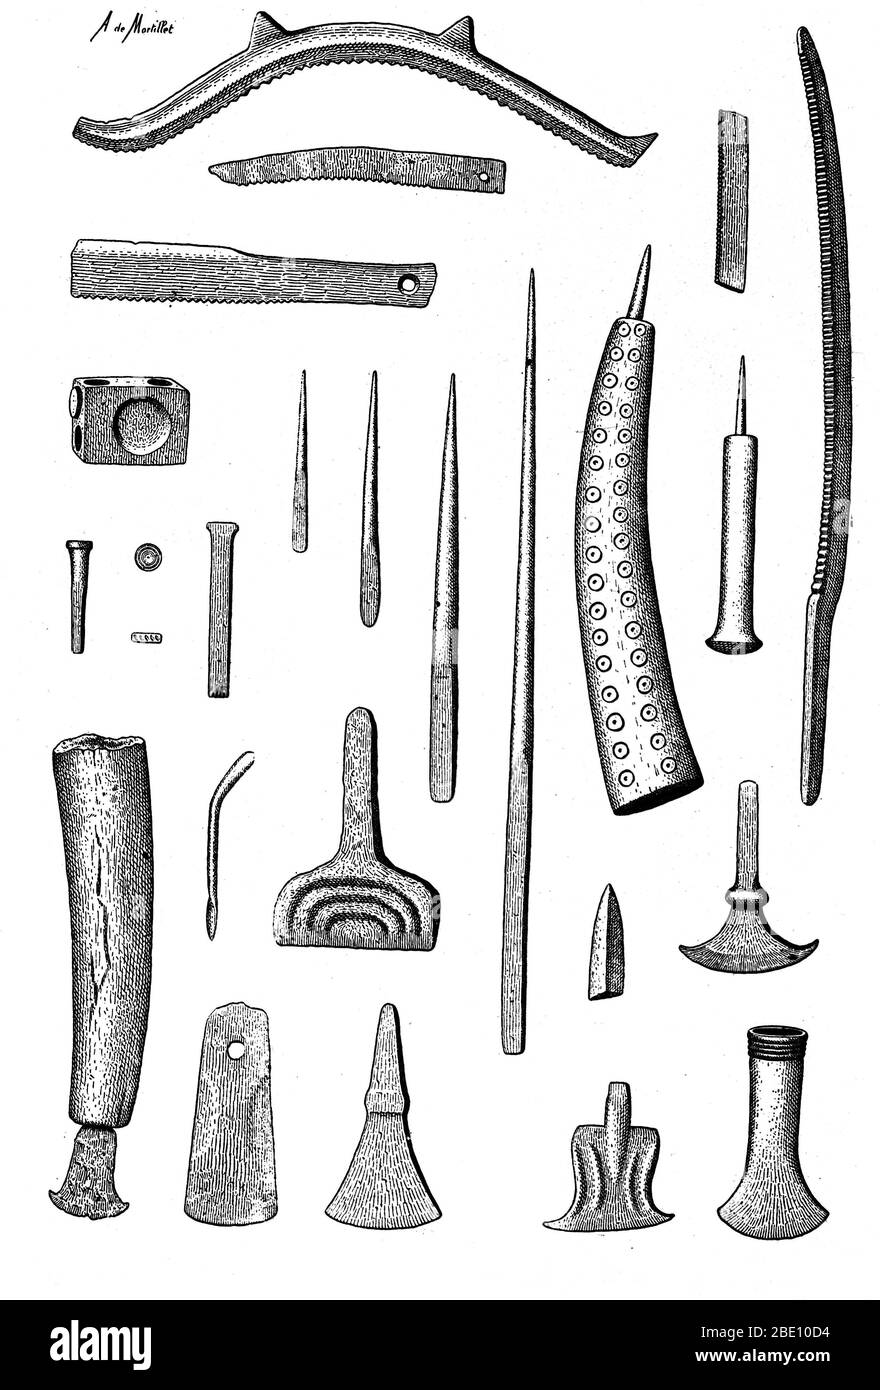 Late Bronze Age European tools such as hammers, chisels, gouges, and saws, c. 3200 to 600 BC. Stock Photo